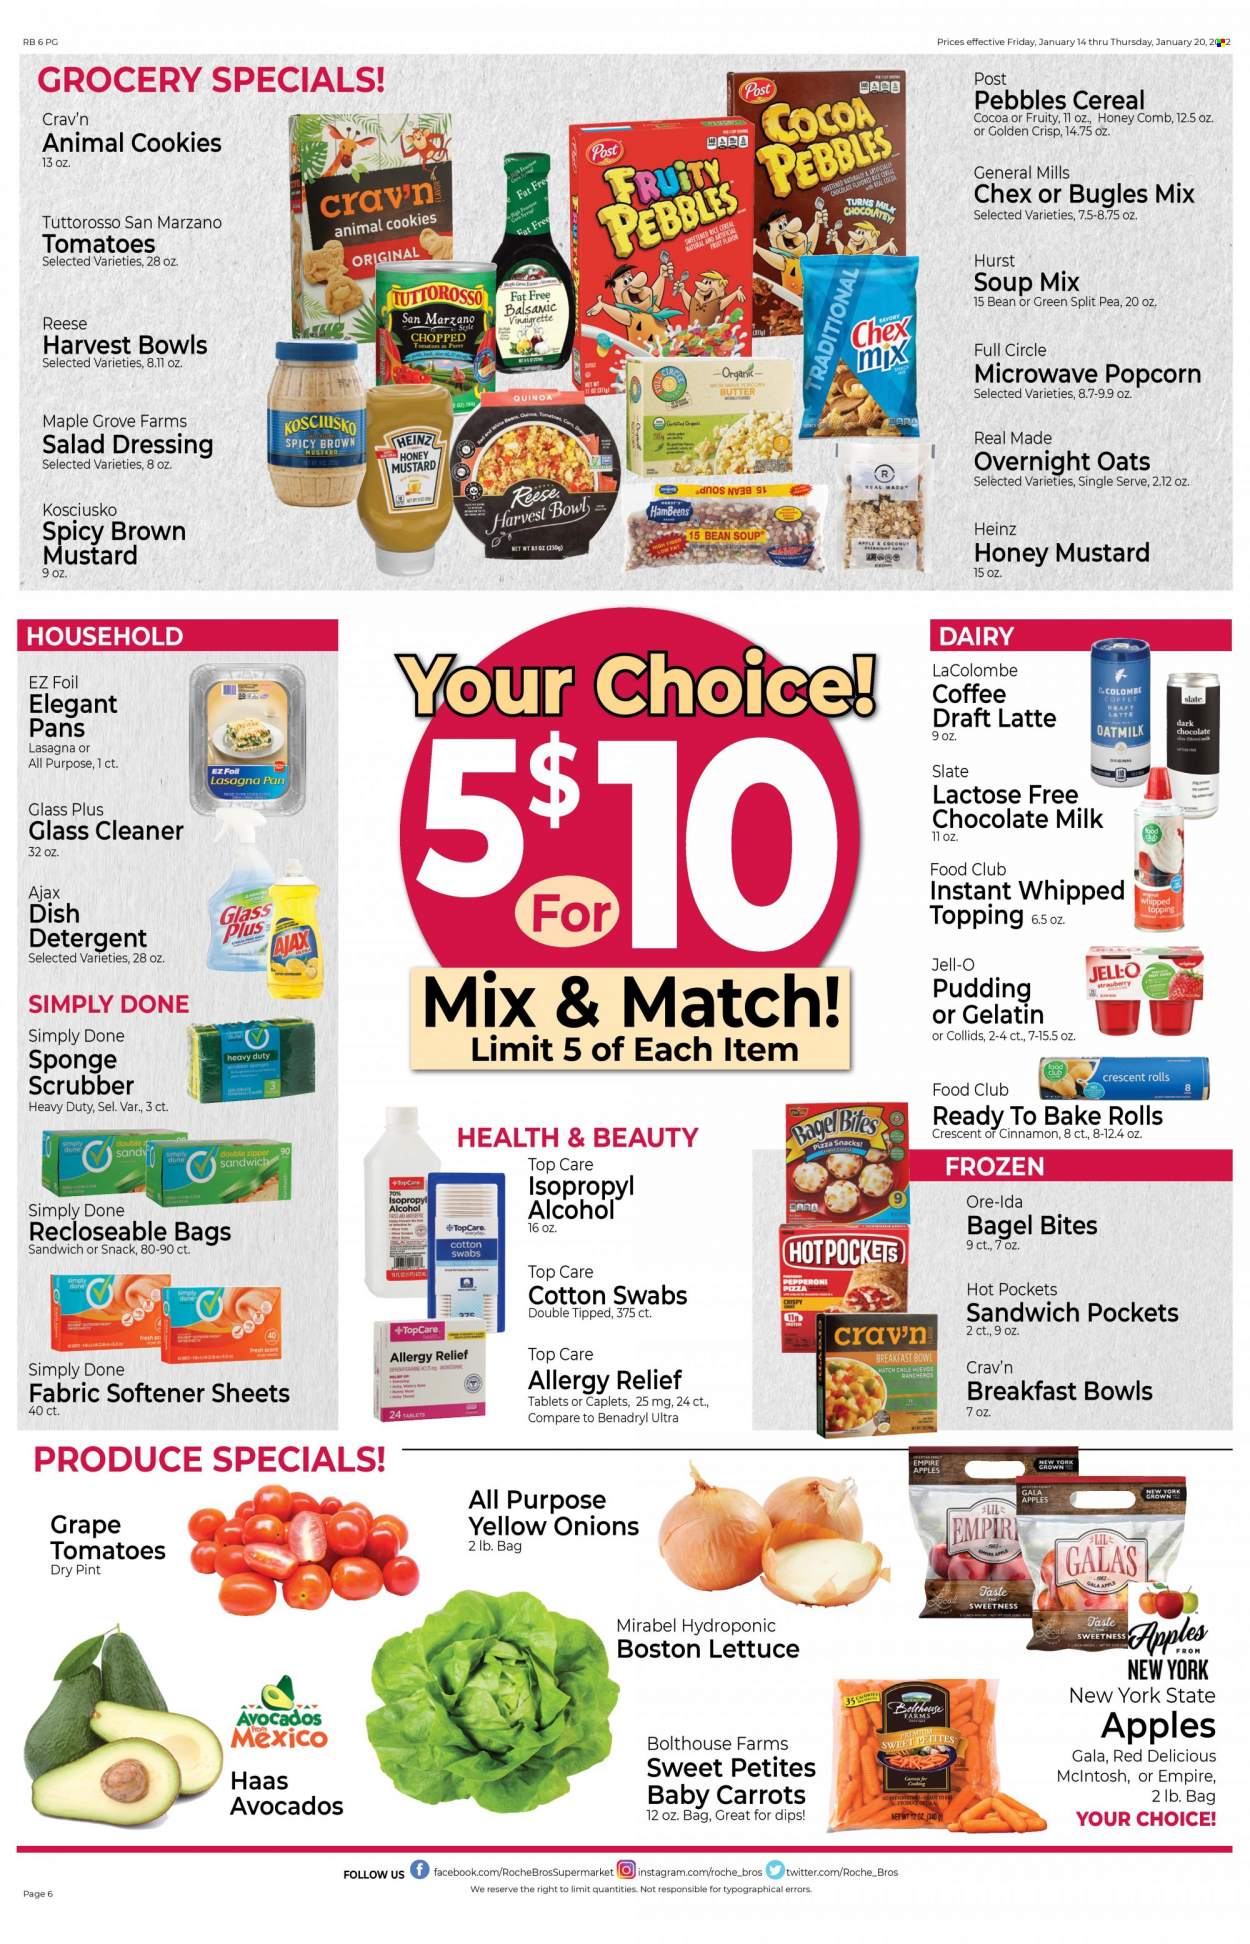 thumbnail - Roche Bros. Flyer - 01/14/2022 - 01/20/2022 - Sales products - bagels, crescent rolls, carrots, lettuce, avocado, Gala, Red Delicious apples, hot pocket, pizza, soup mix, soup, breakfast bowl, lasagna meal, pepperoni, pudding, milk, oat milk, butter, Ore-Ida, cookies, milk chocolate, chocolate, dark chocolate, popcorn, Chex Mix, topping, Jell-O, Heinz, cereals, Fruity Pebbles, quinoa, cinnamon, mustard, salad dressing, vinaigrette dressing, honey mustard, dressing, detergent, cleaner, glass cleaner, Ajax, fabric softener, comb, allergy relief. Page 6.